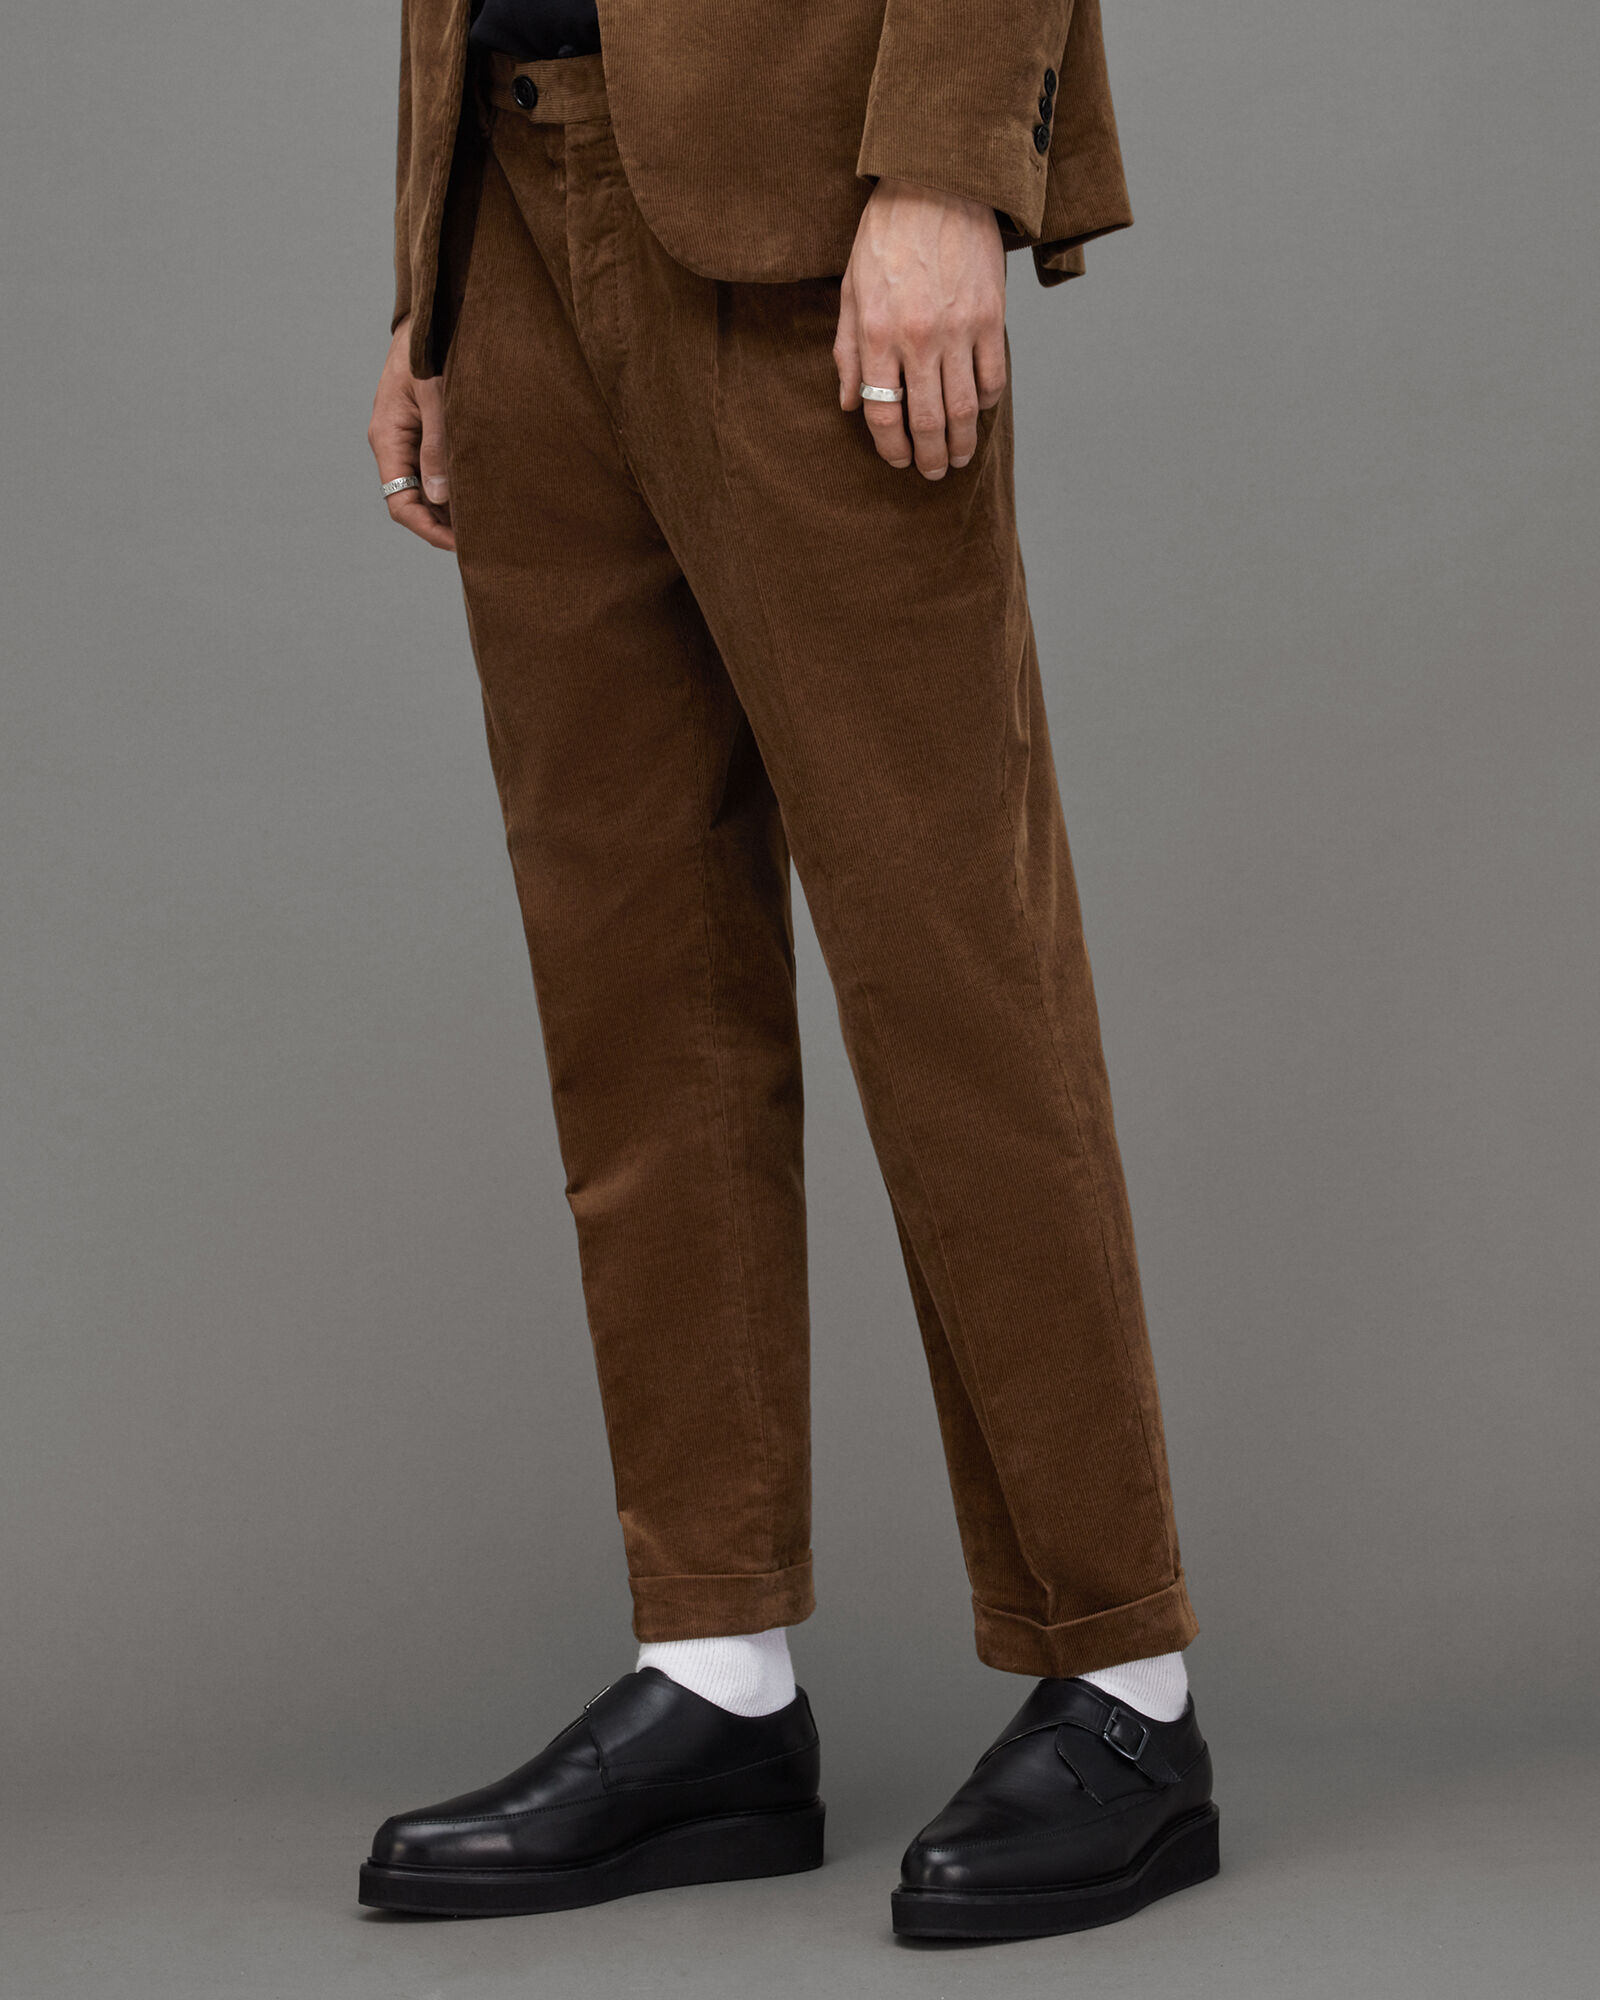 Men's Trousers | Formal, Casual, Chinos, Pants | Indian Terrain